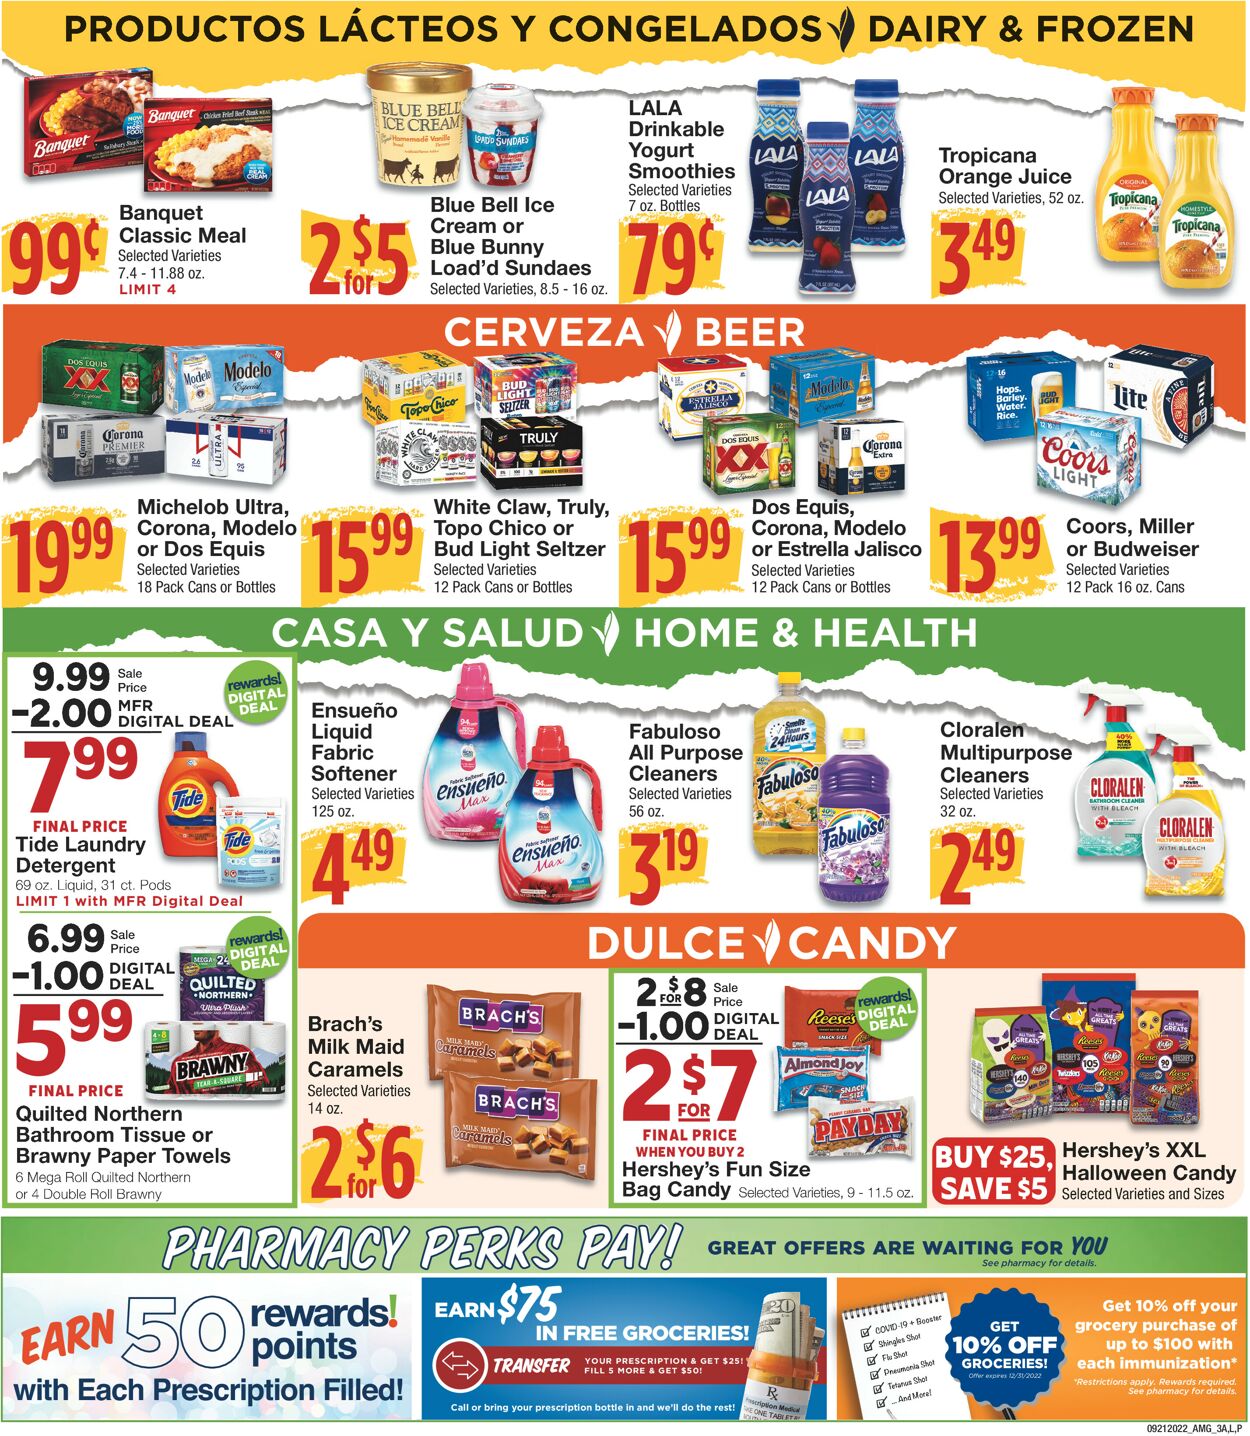 Catalogue United Supermarkets from 09/21/2022